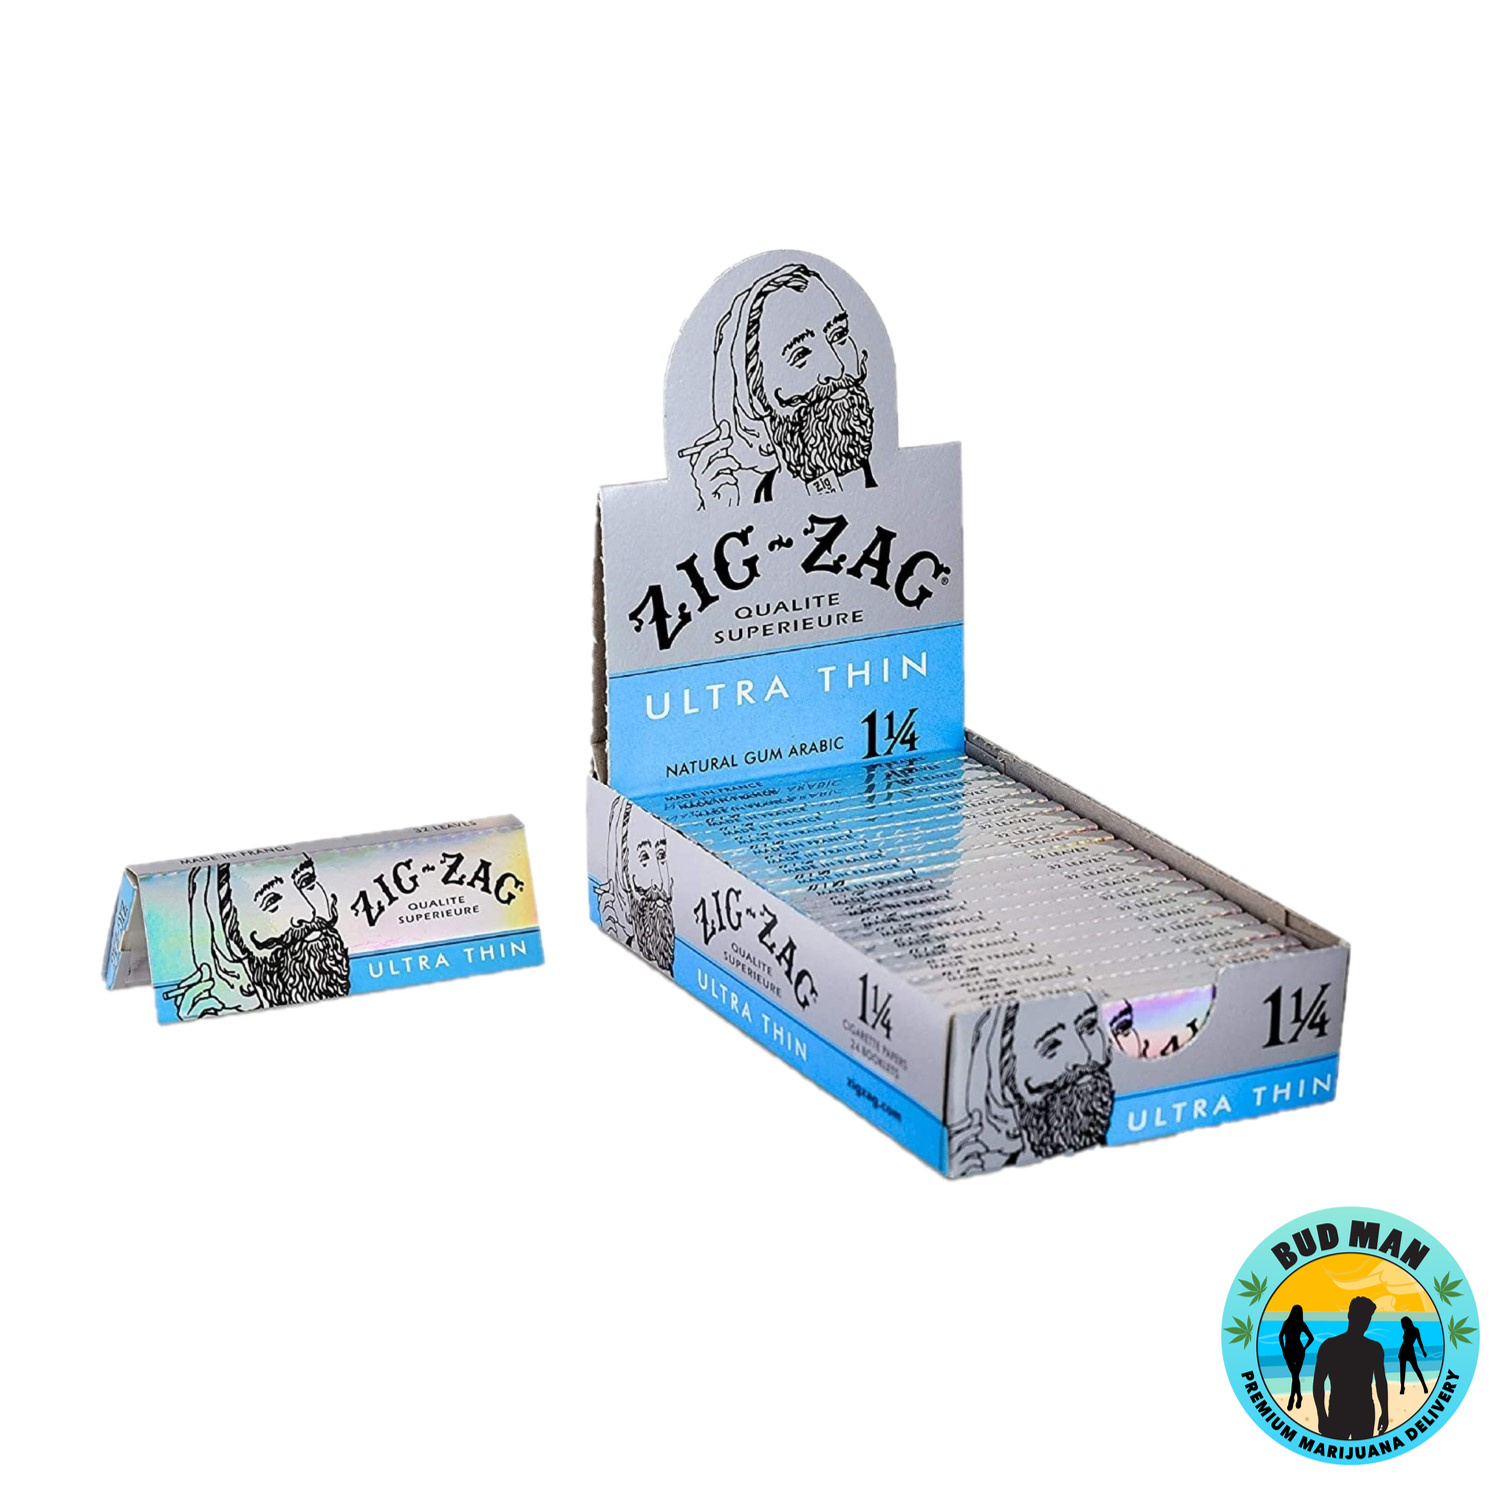 Zig Zag Joint Roller (3 options): Bud Man Orange County Dispensary Delivery